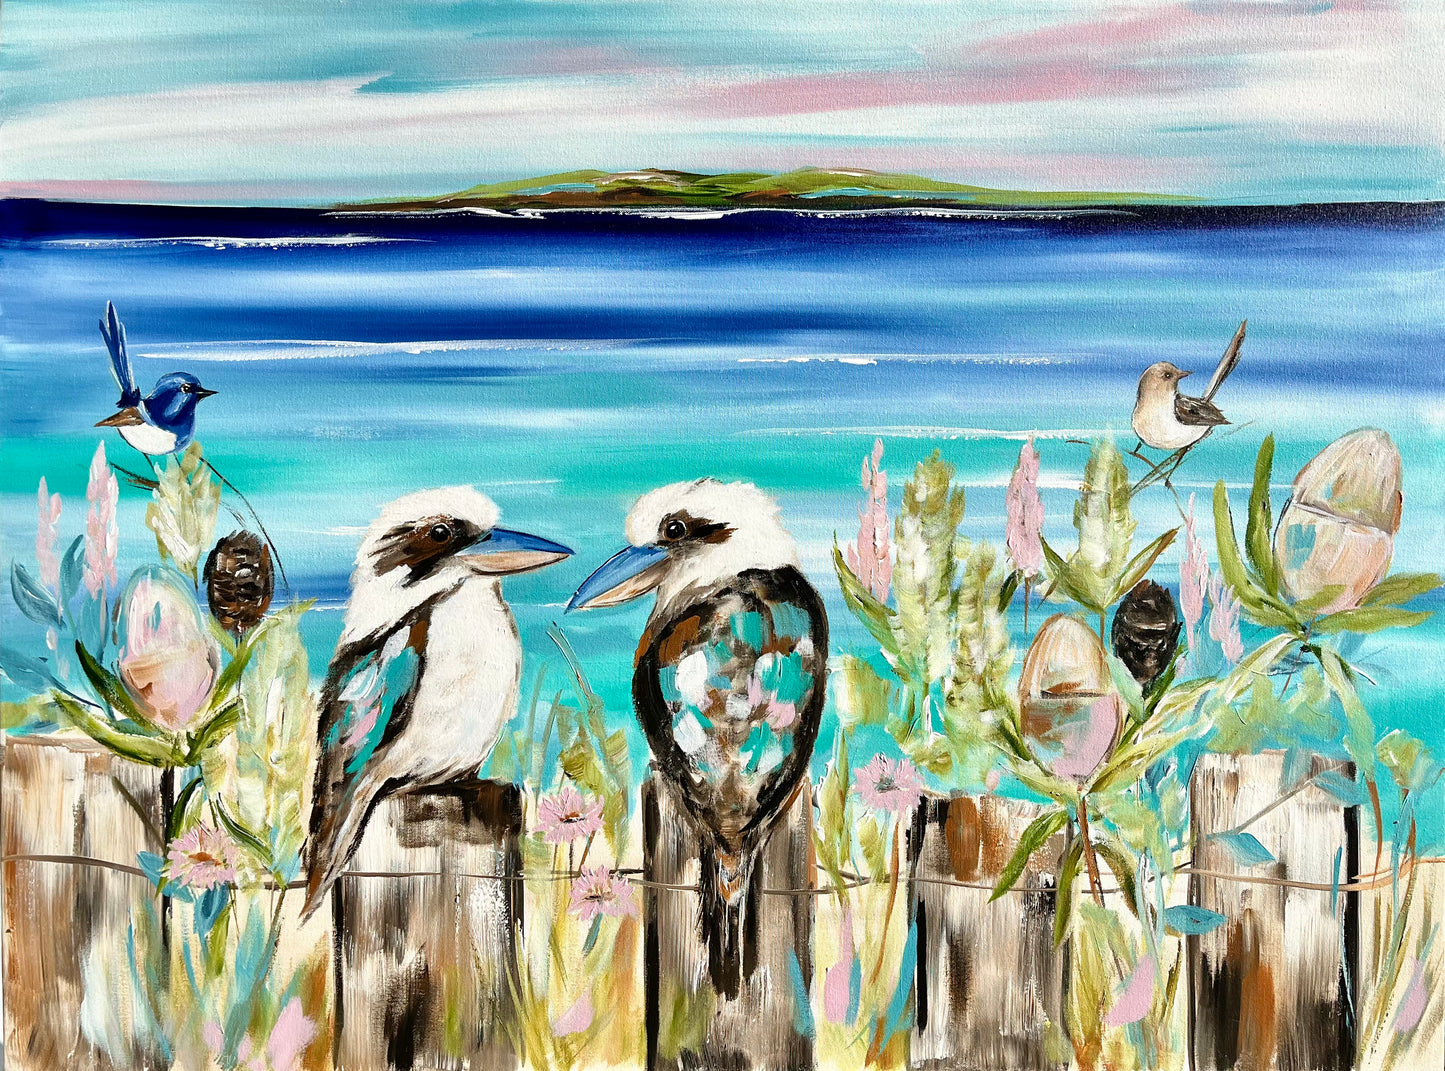 Beach to bush - Kookaburras & Blue Wrens - 1.2x900 - Available by Commission